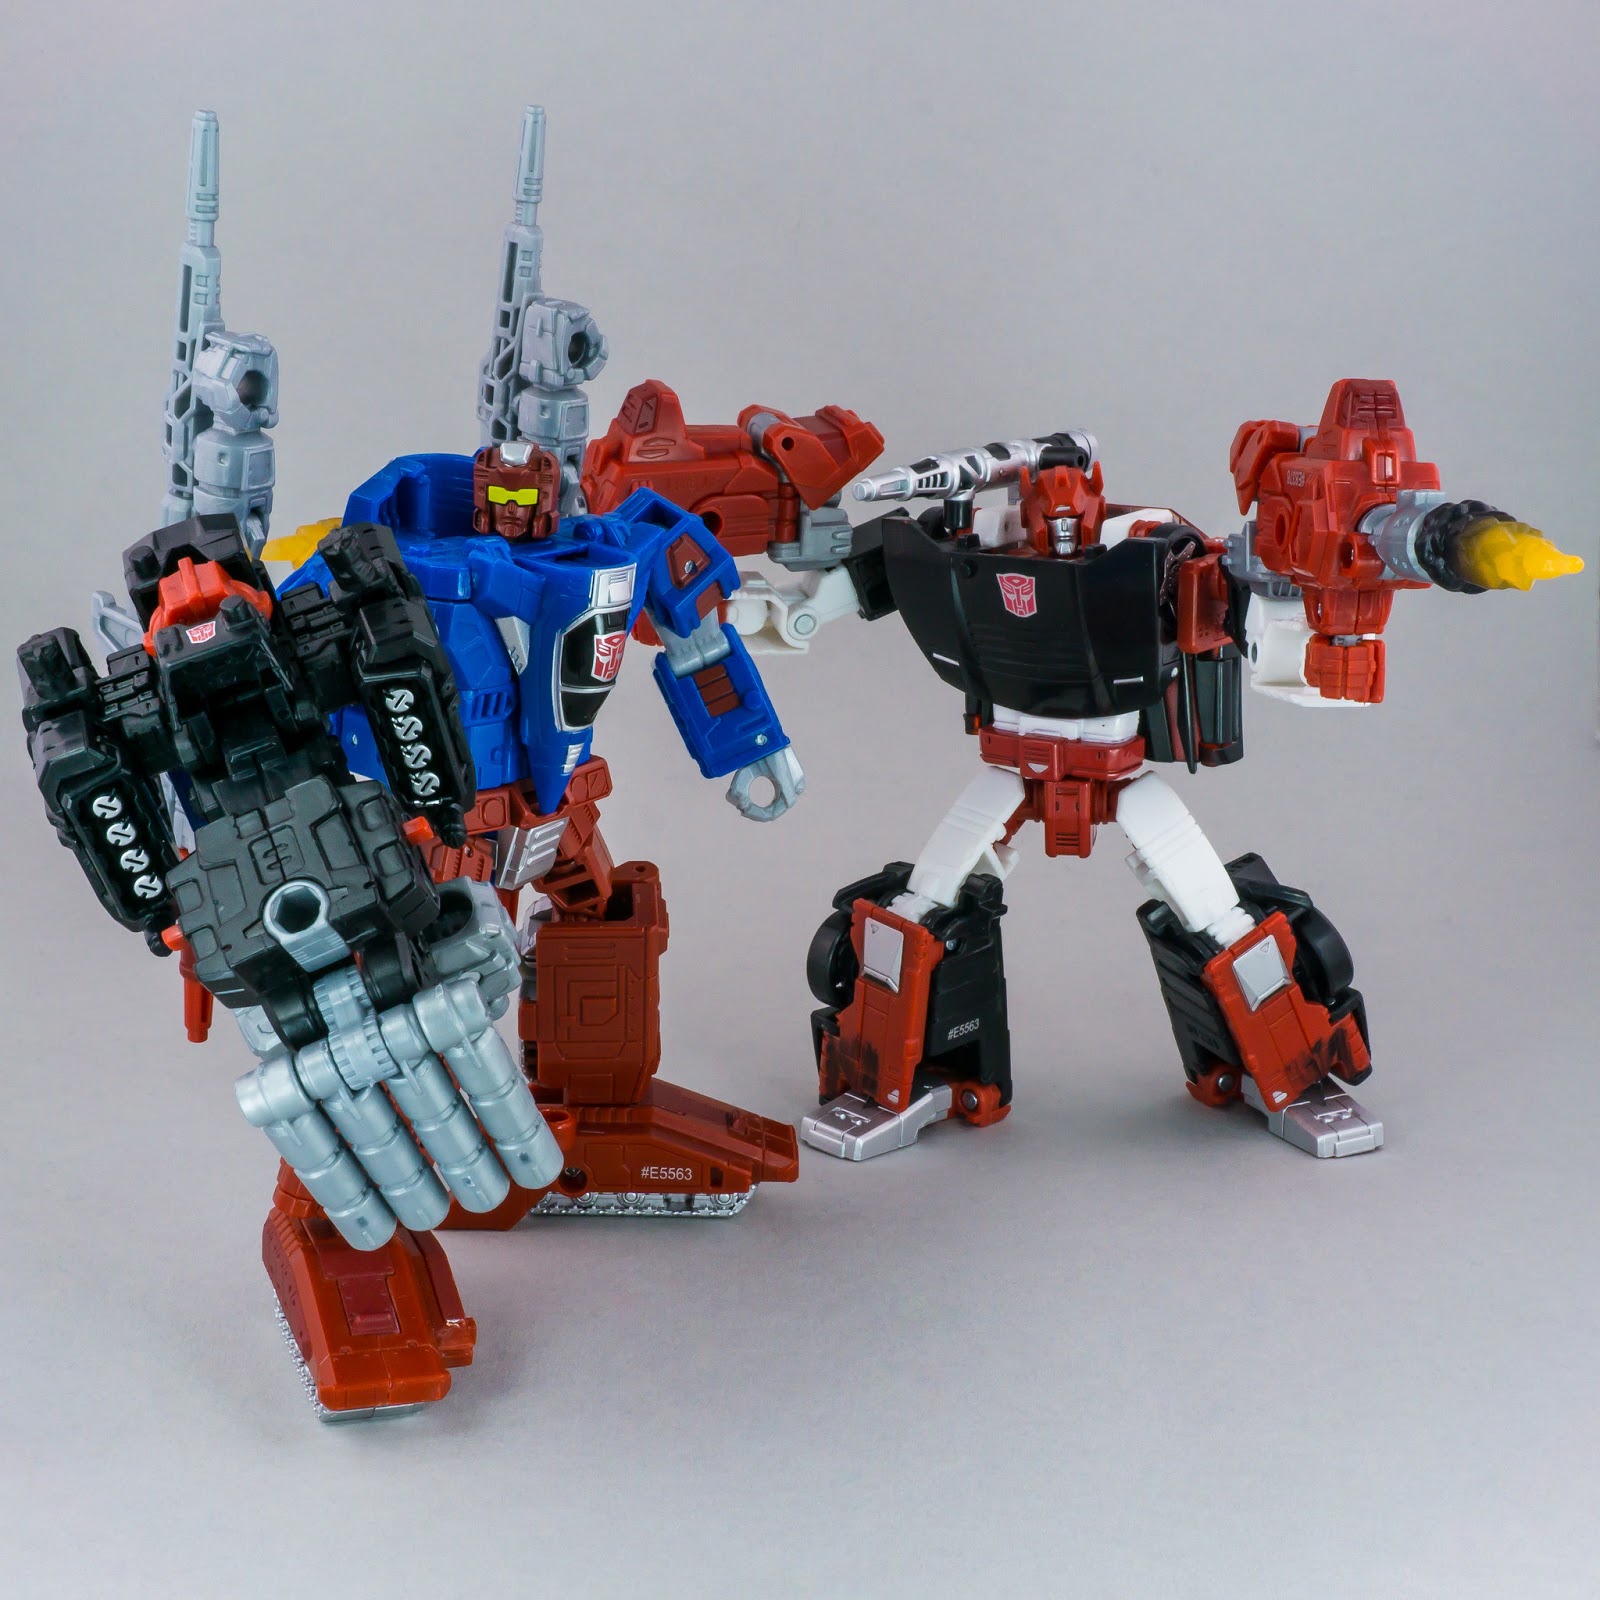 Transformers Generations Selects Cromar launcher gauntlet weaponizer mode